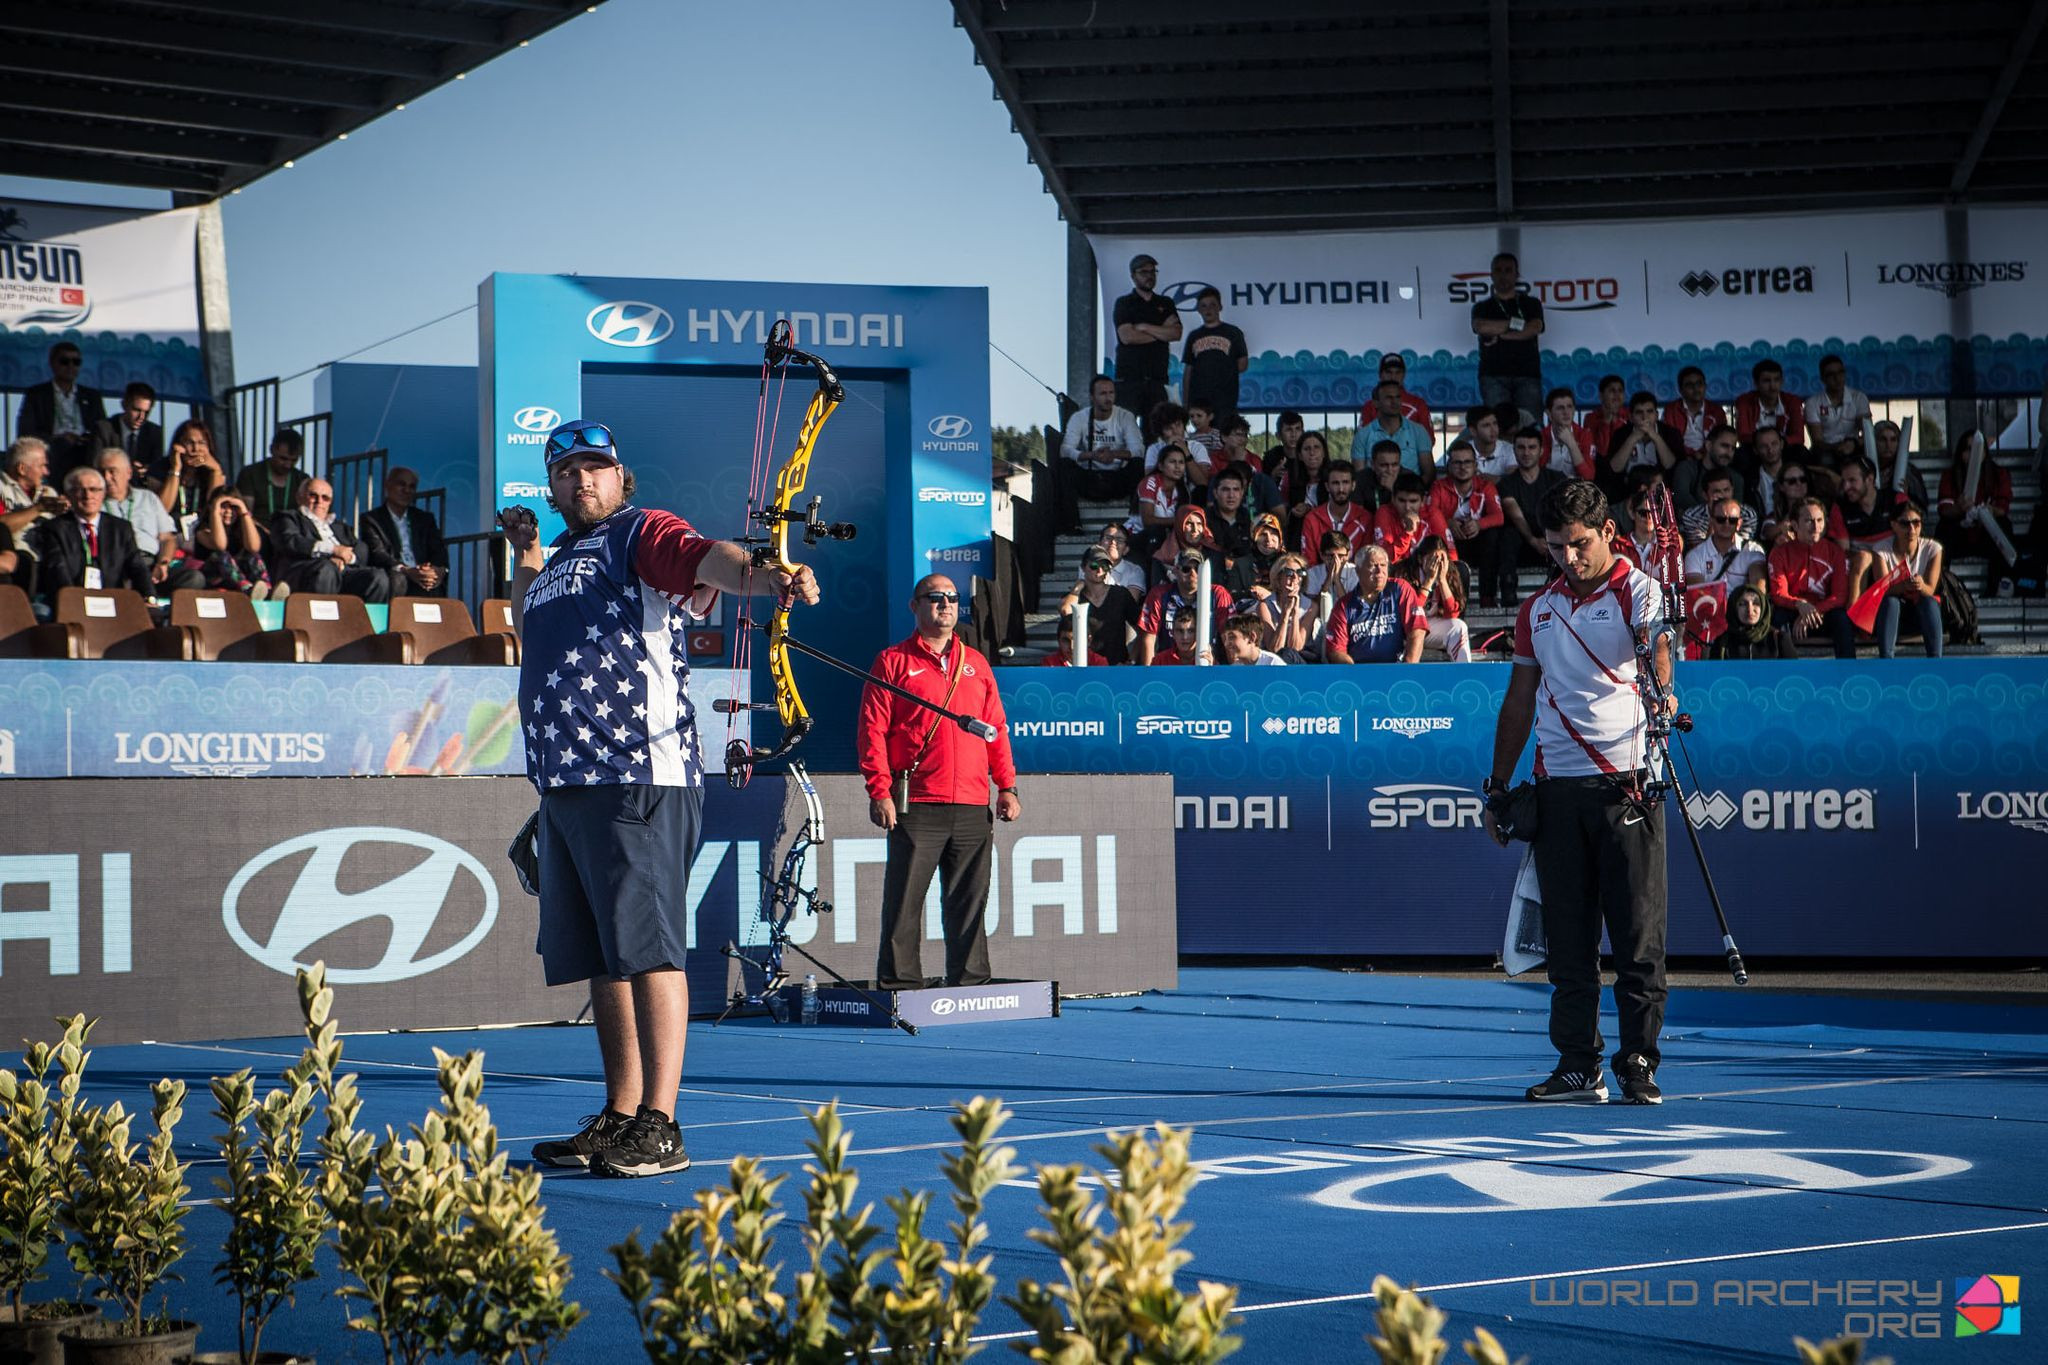 Kris Schaff of the United States beat home archer Demir Elmaagacli to gold in the men's compound at the Archery World Cup final in Samsun, Turkey ©World Archery